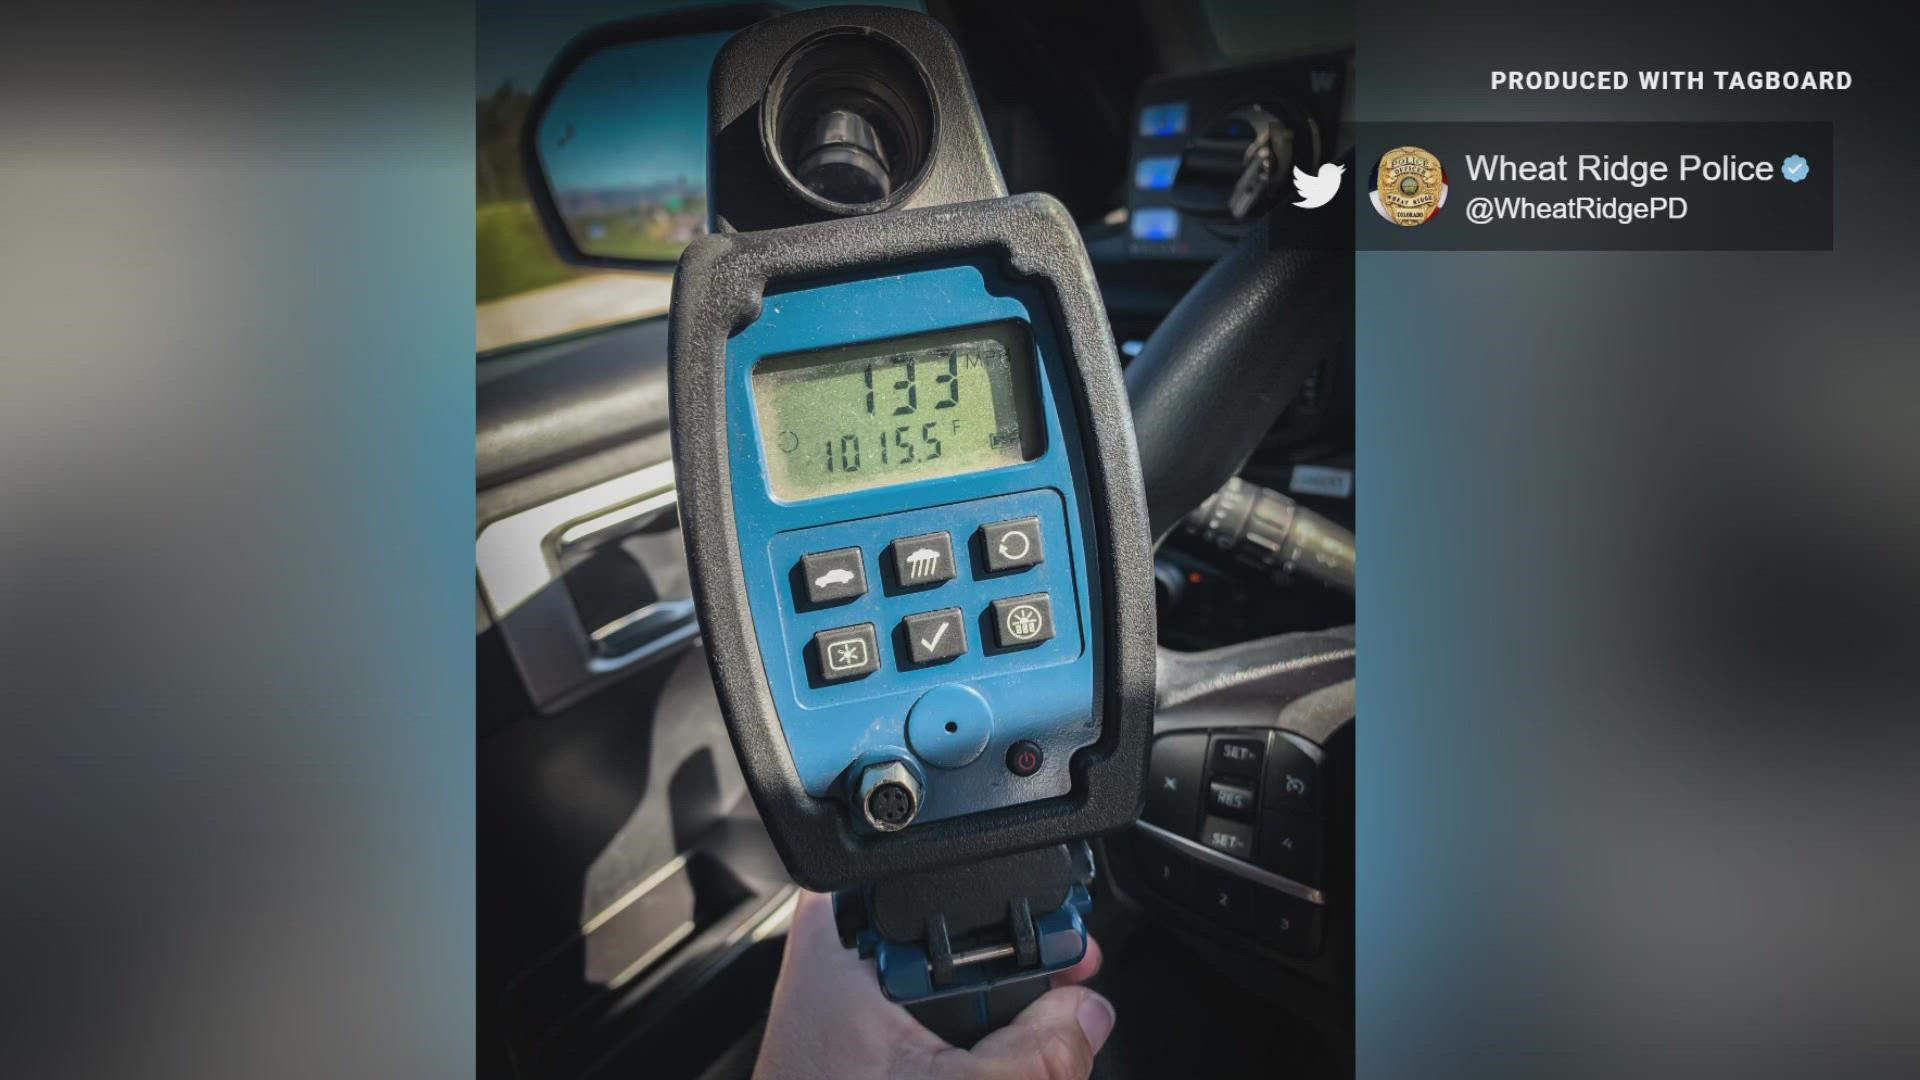 "Frankly, it's terrifying," police said in a tweet after capturing the driver speeding in the eastbound lanes of Interstate 70 Sunday morning.